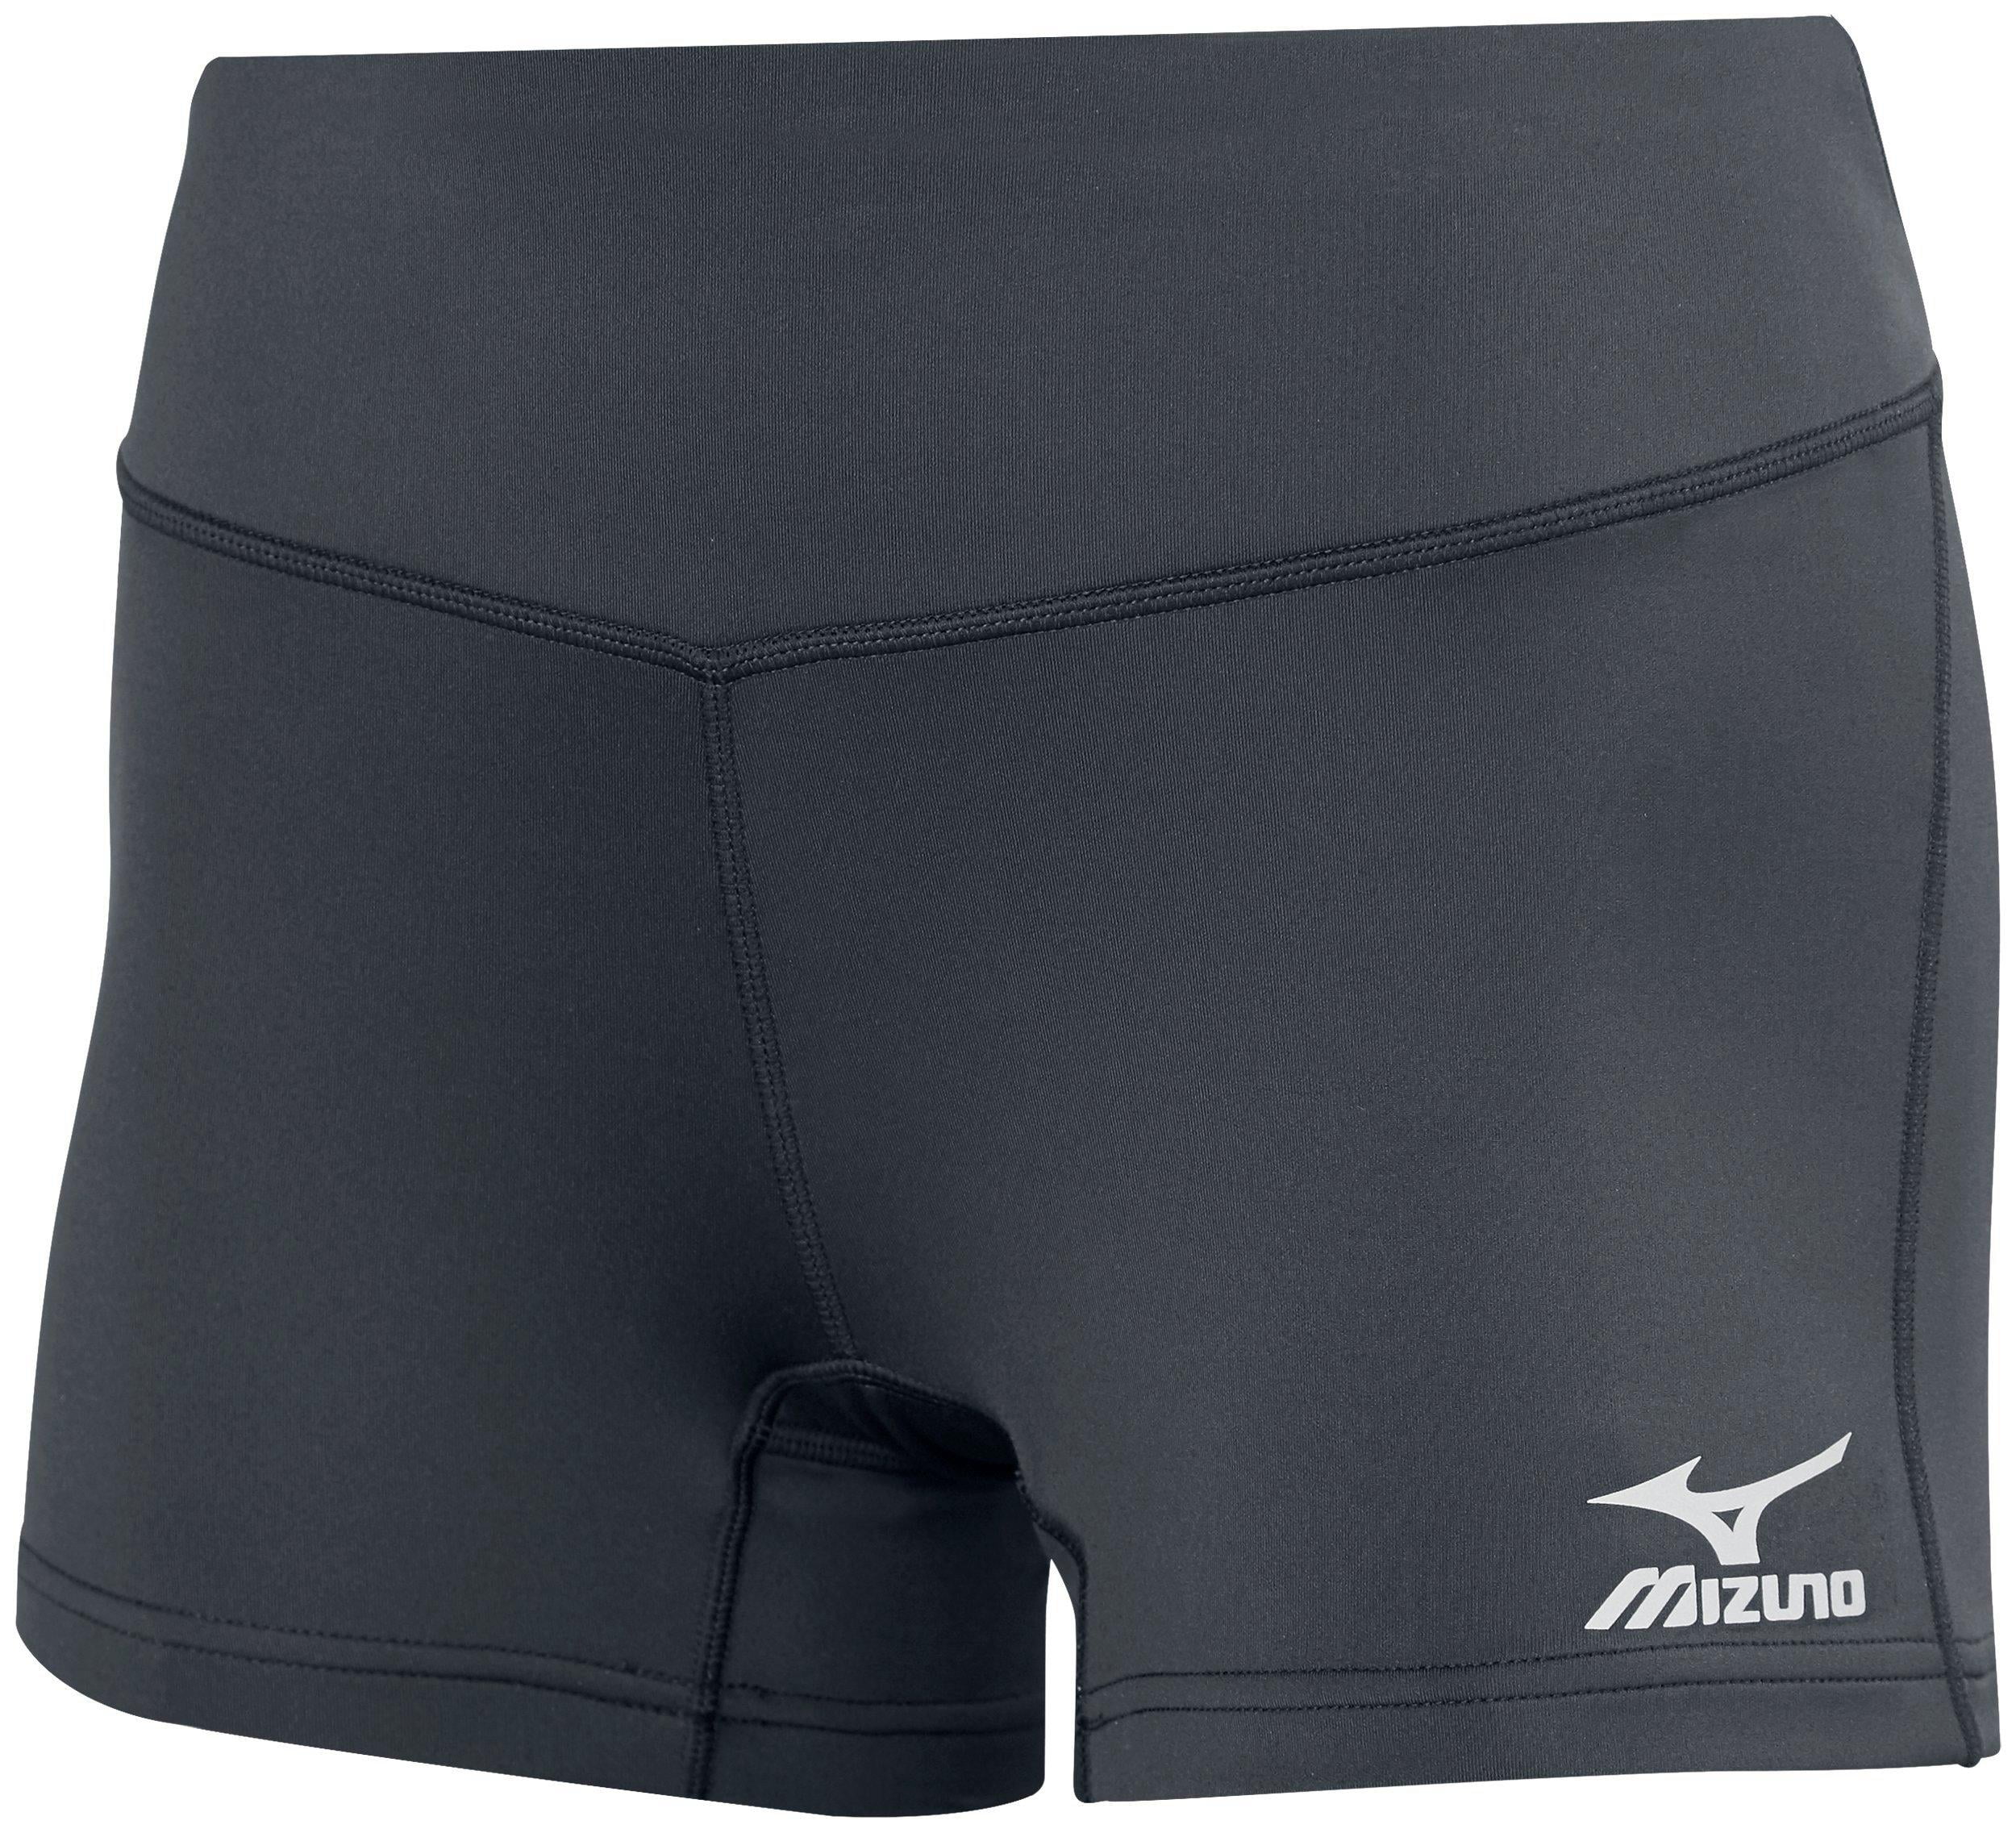 Mizuno Victory 3.5 Inseam Volleyball Shorts, Size Extra Extra Large, Navy  (5151)